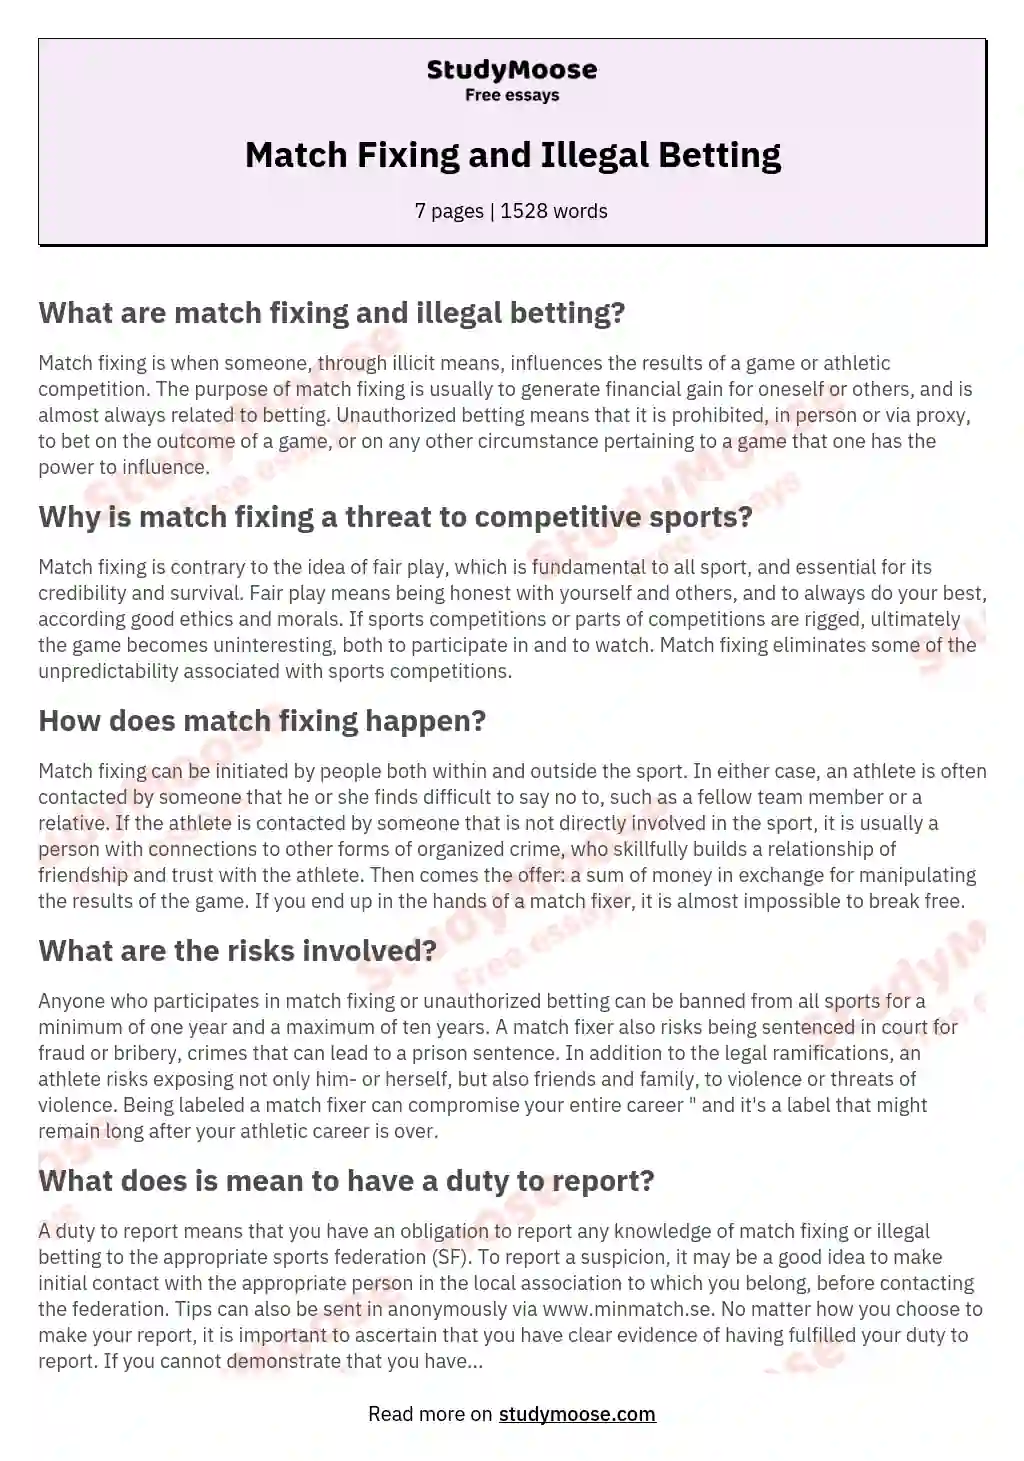 Match Fixing and Illegal Betting essay